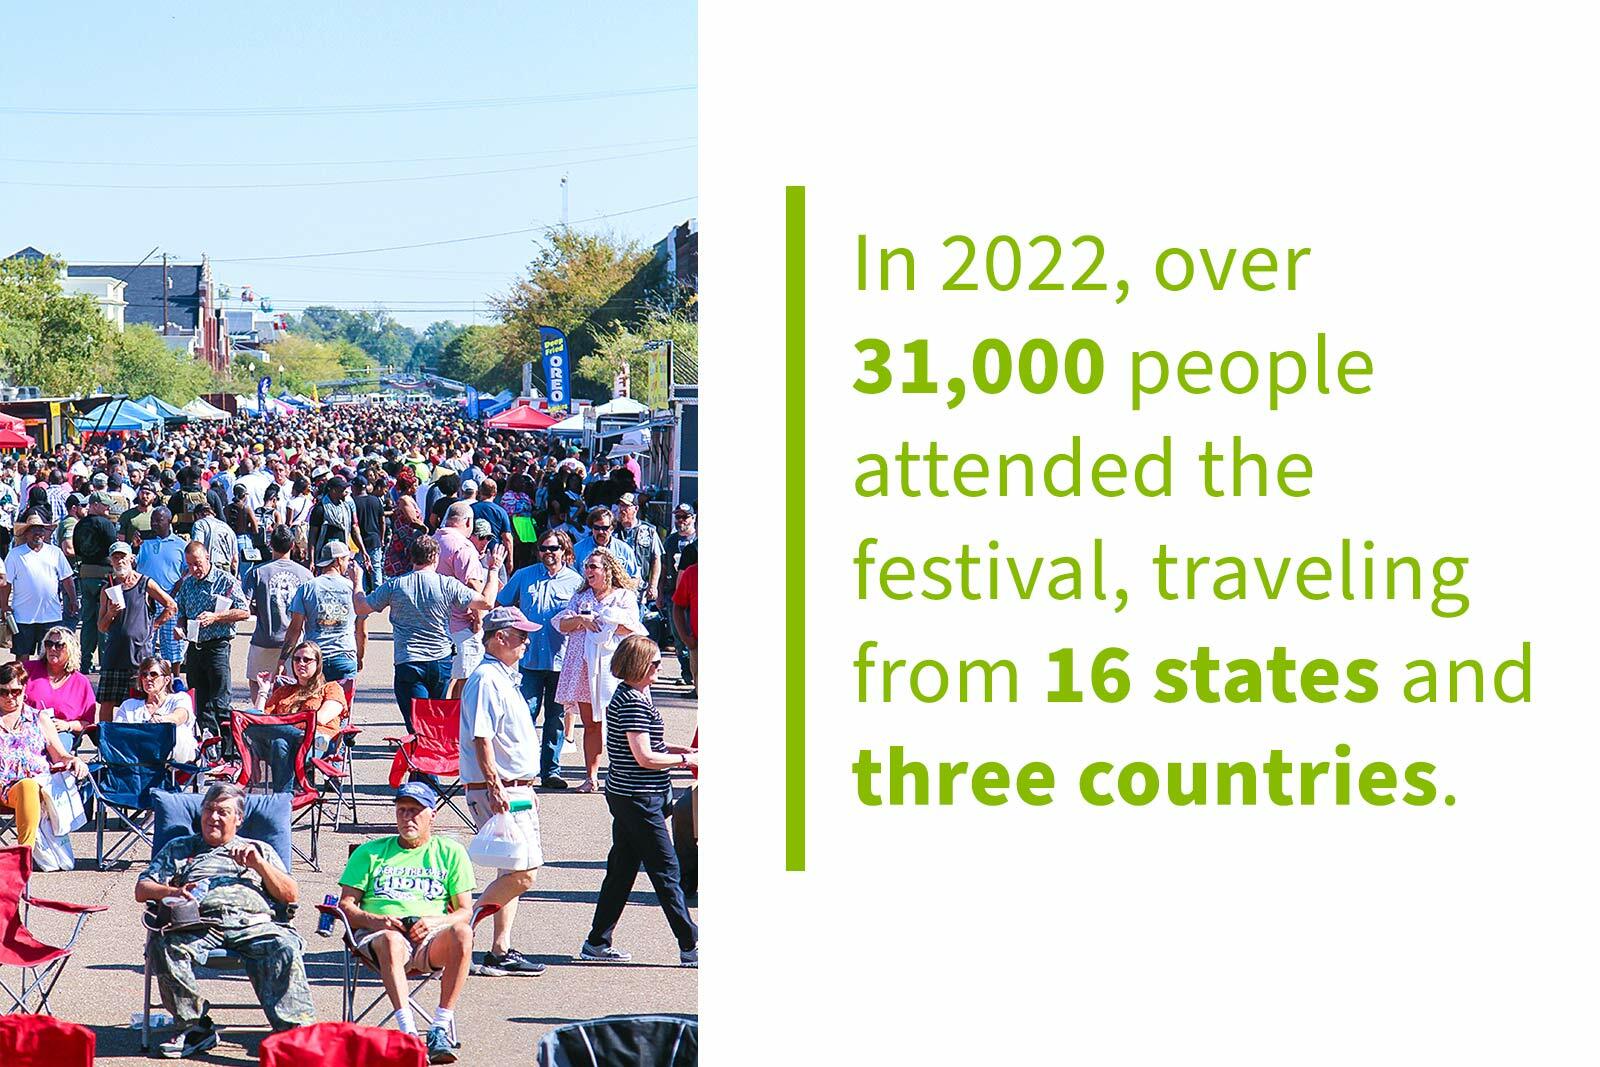 A crowd at the Delta Hot Tamale Festival, with text to the right that reads, "In 2022, over 31,000 people attended the festival, traveling from 16 states and three countries."